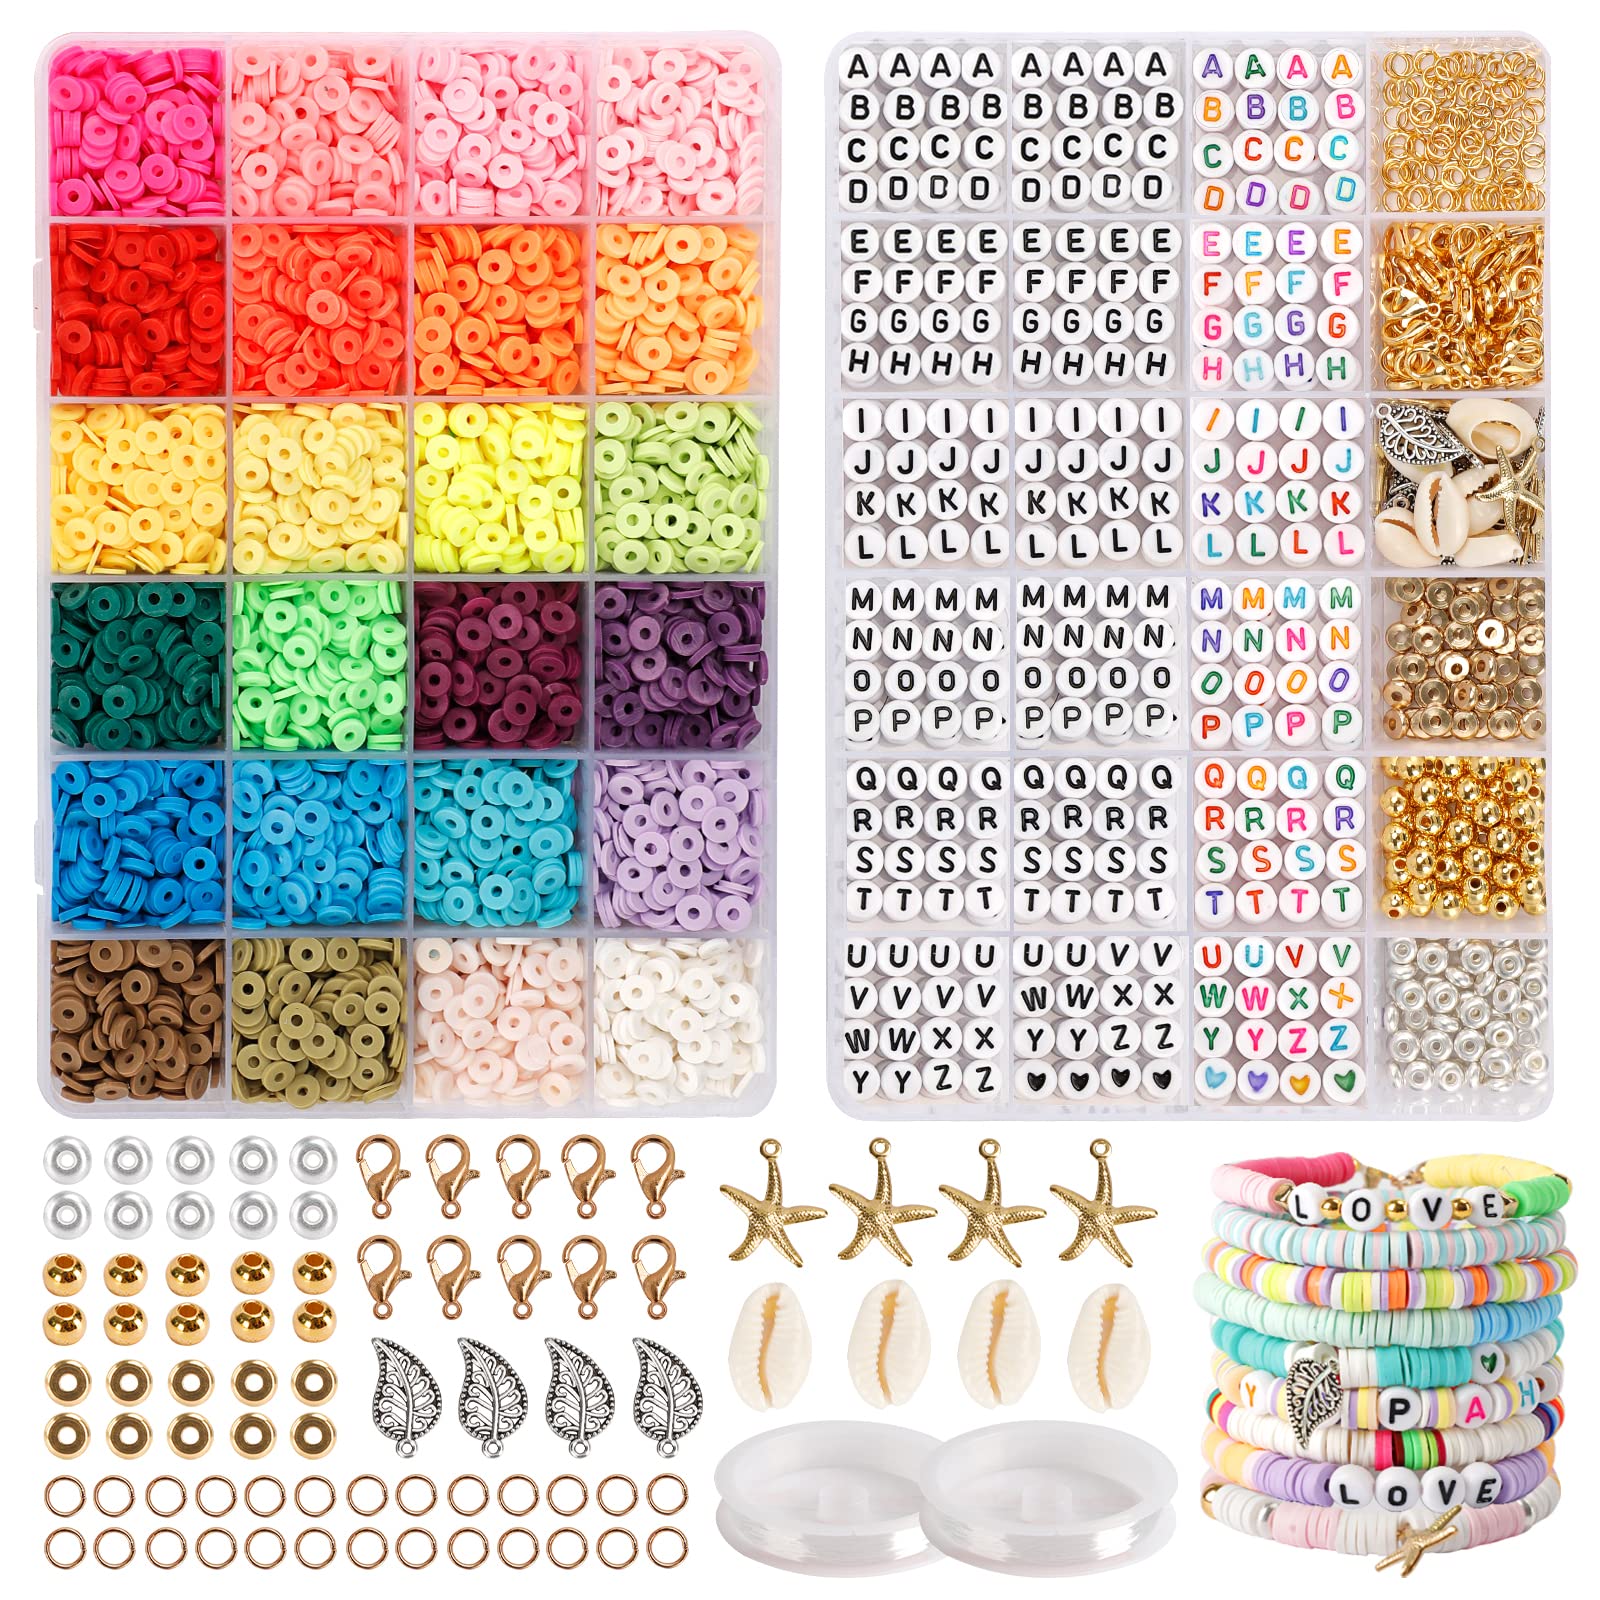  Clay Beads for Bracelet Making Kits, 24 Colors 6000